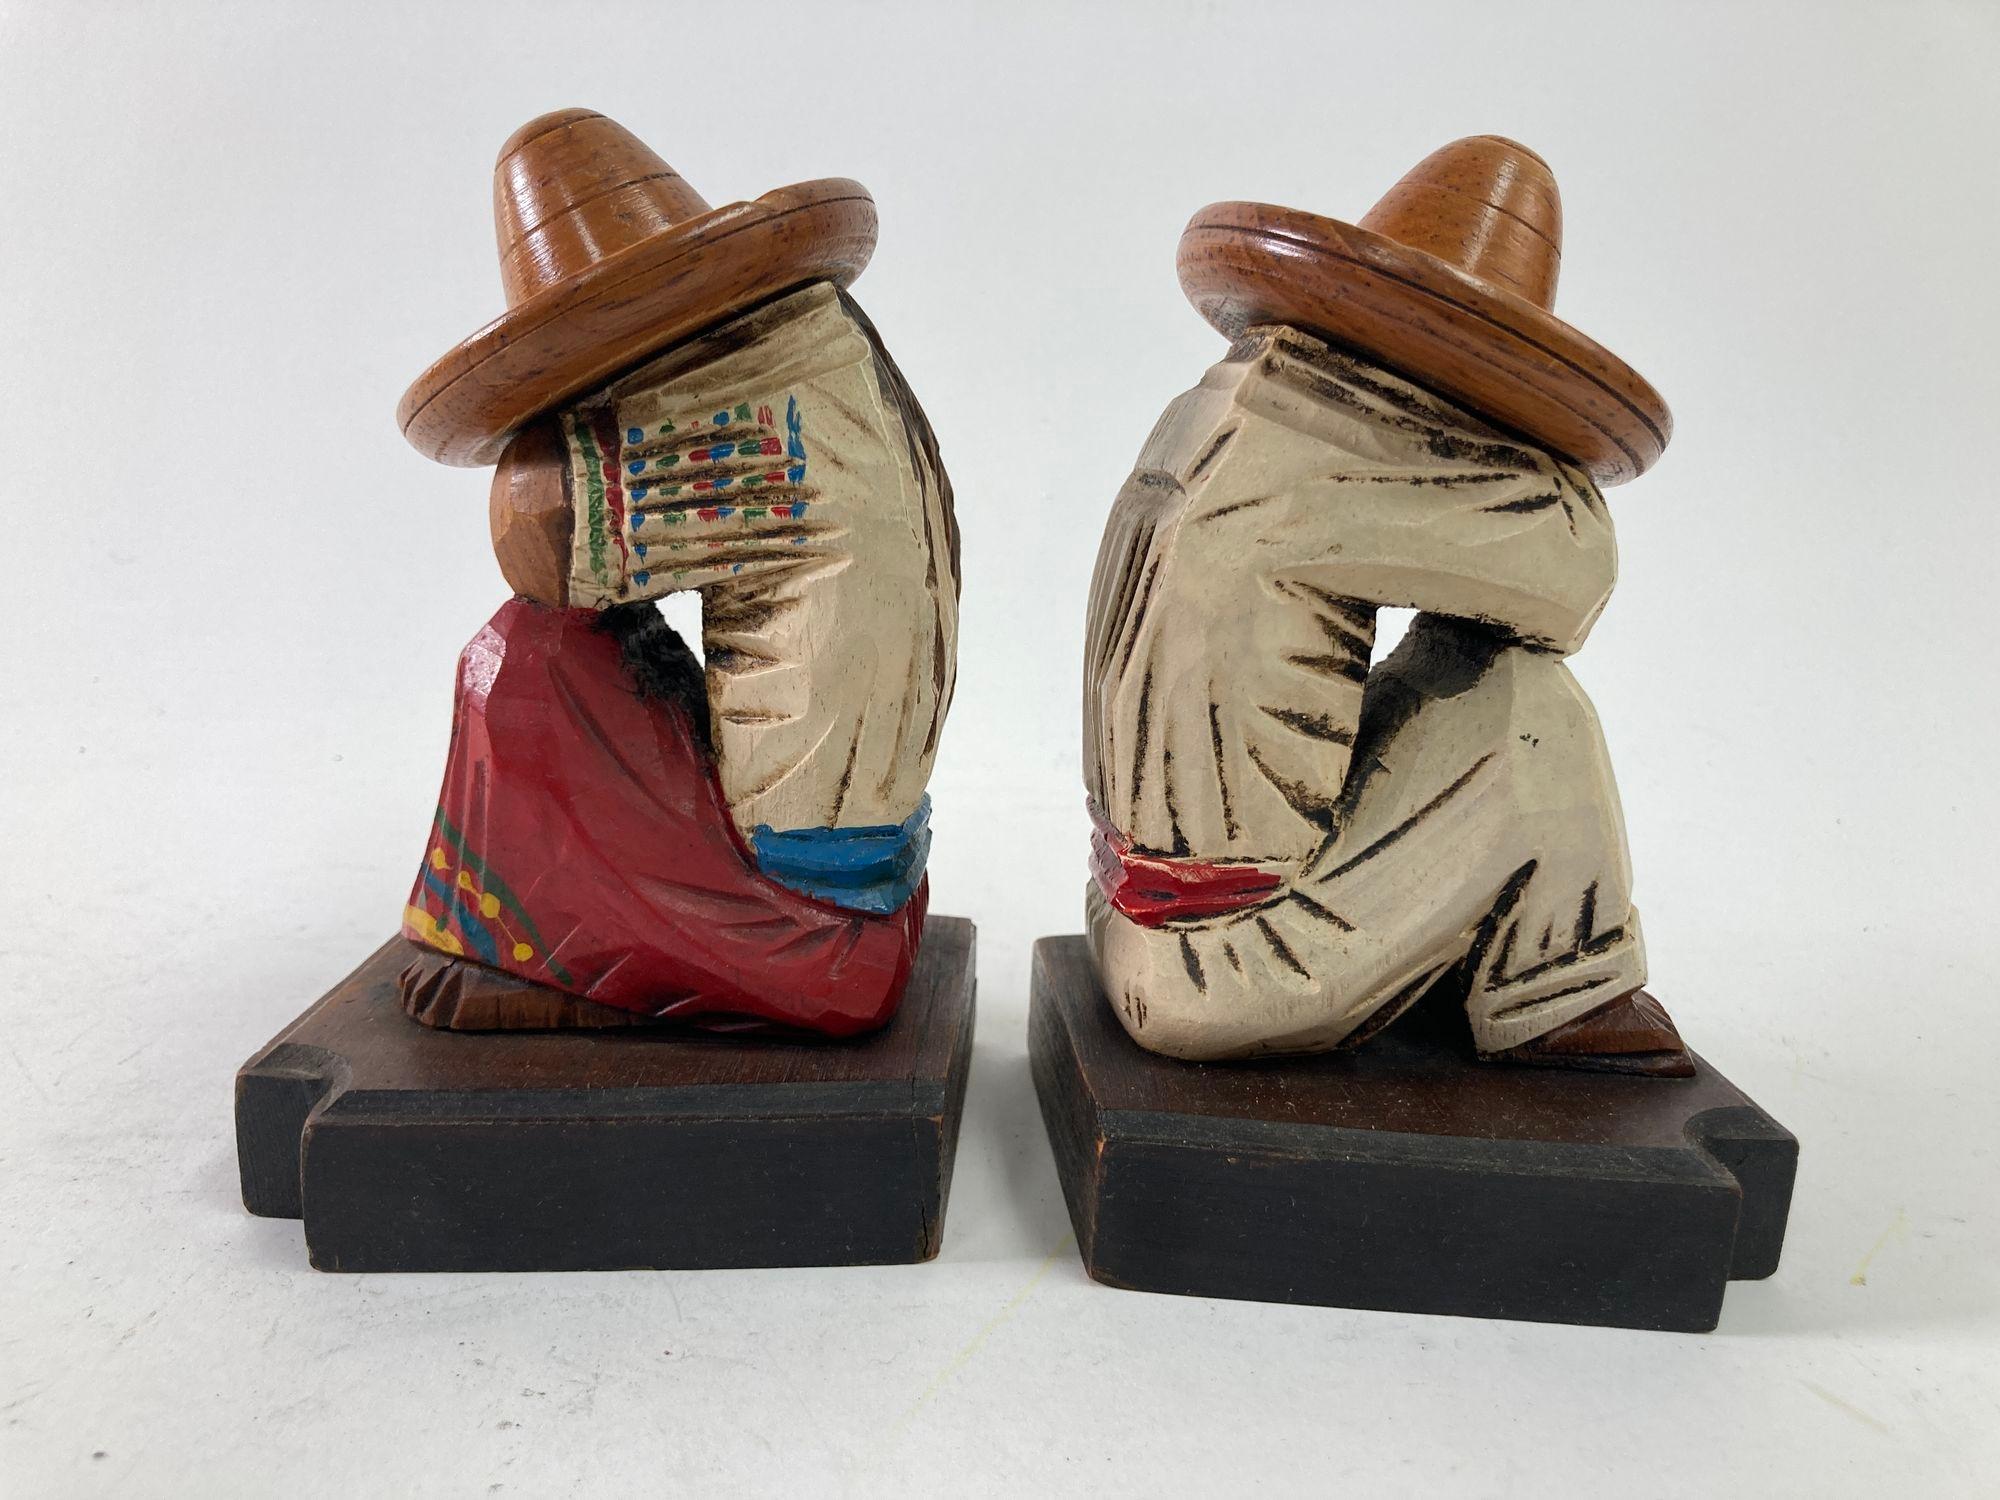 Vintage 1950s Mexican Carved Wood Sculpture Polychrome Bookends Siesta Folk Art 6